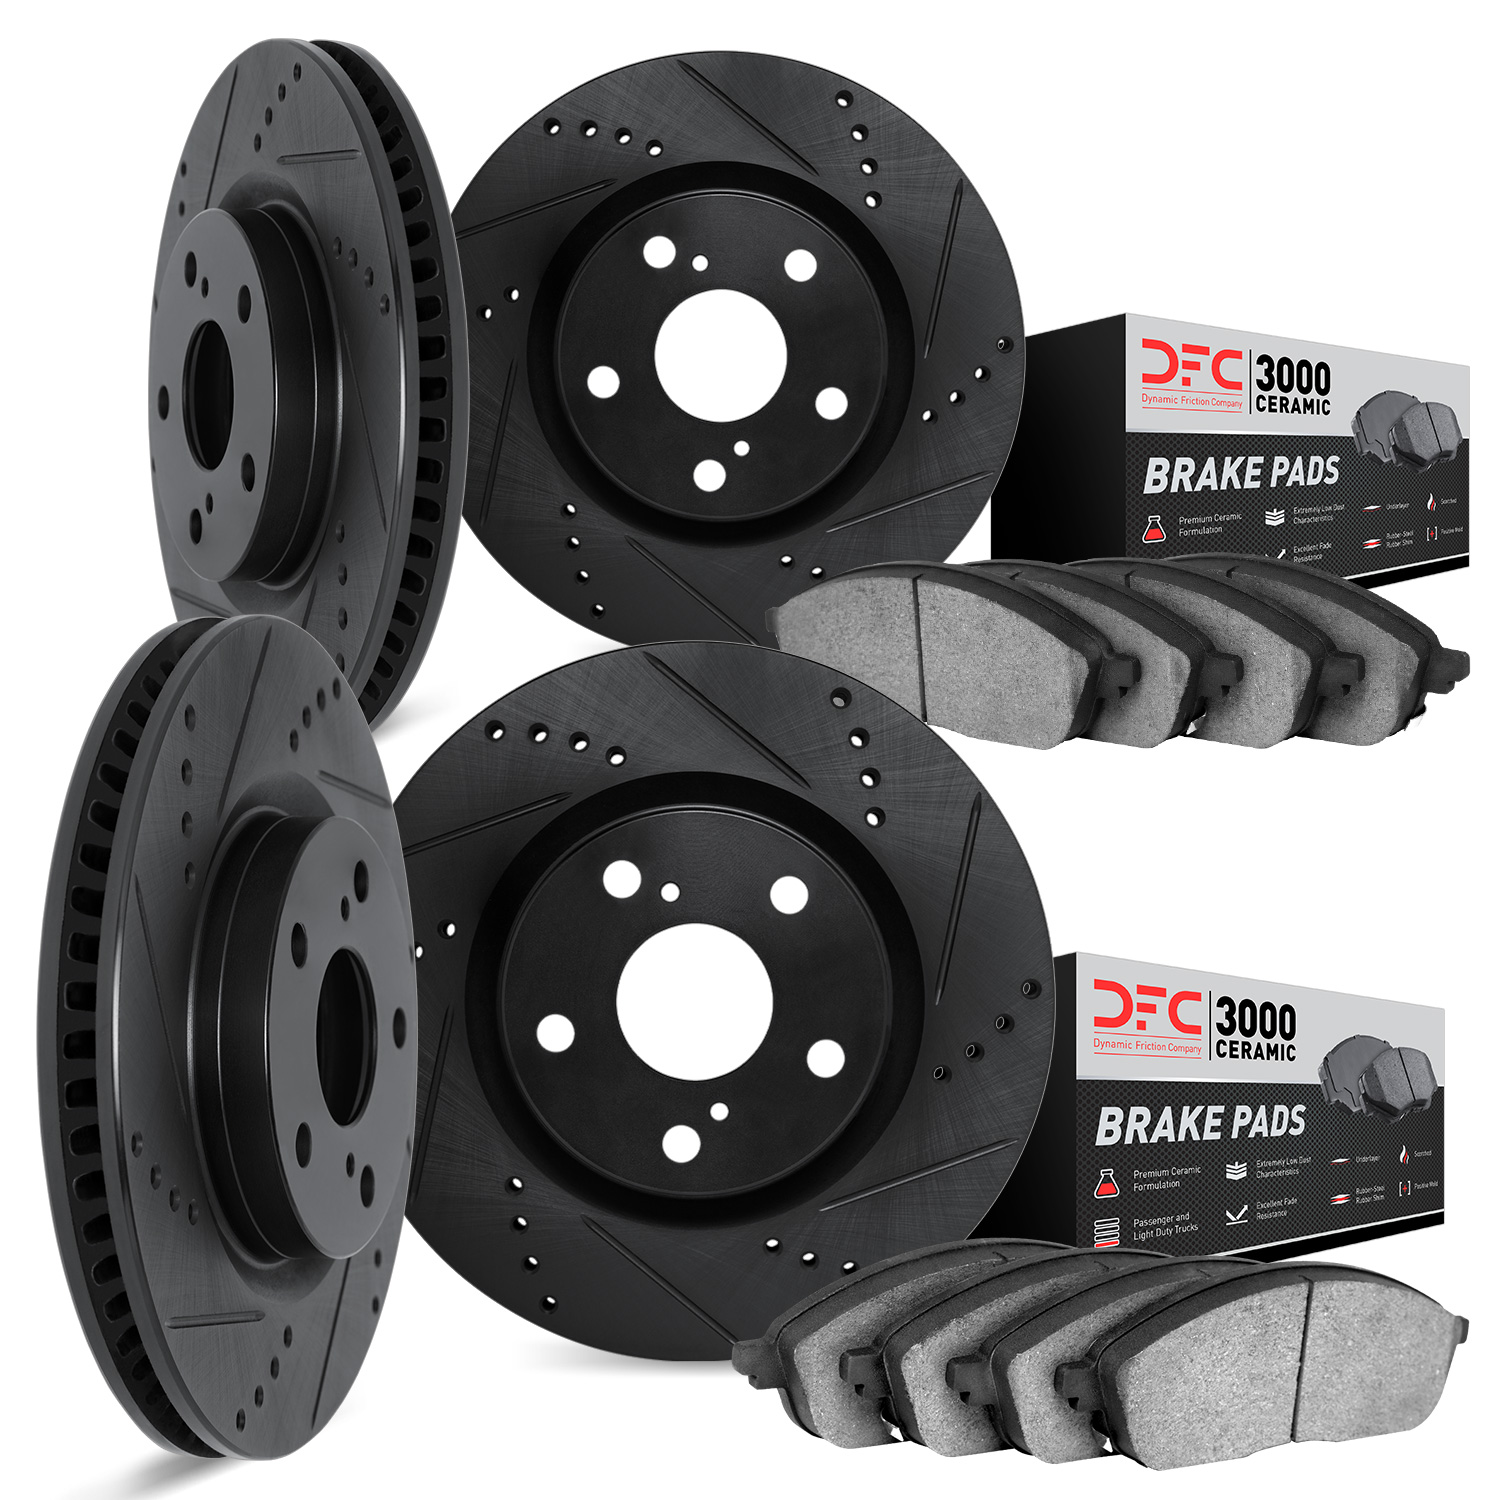 8304-31046 Drilled/Slotted Brake Rotors with 3000-Series Ceramic Brake Pads Kit [Black], 1996-2003 BMW, Position: Front and Rear